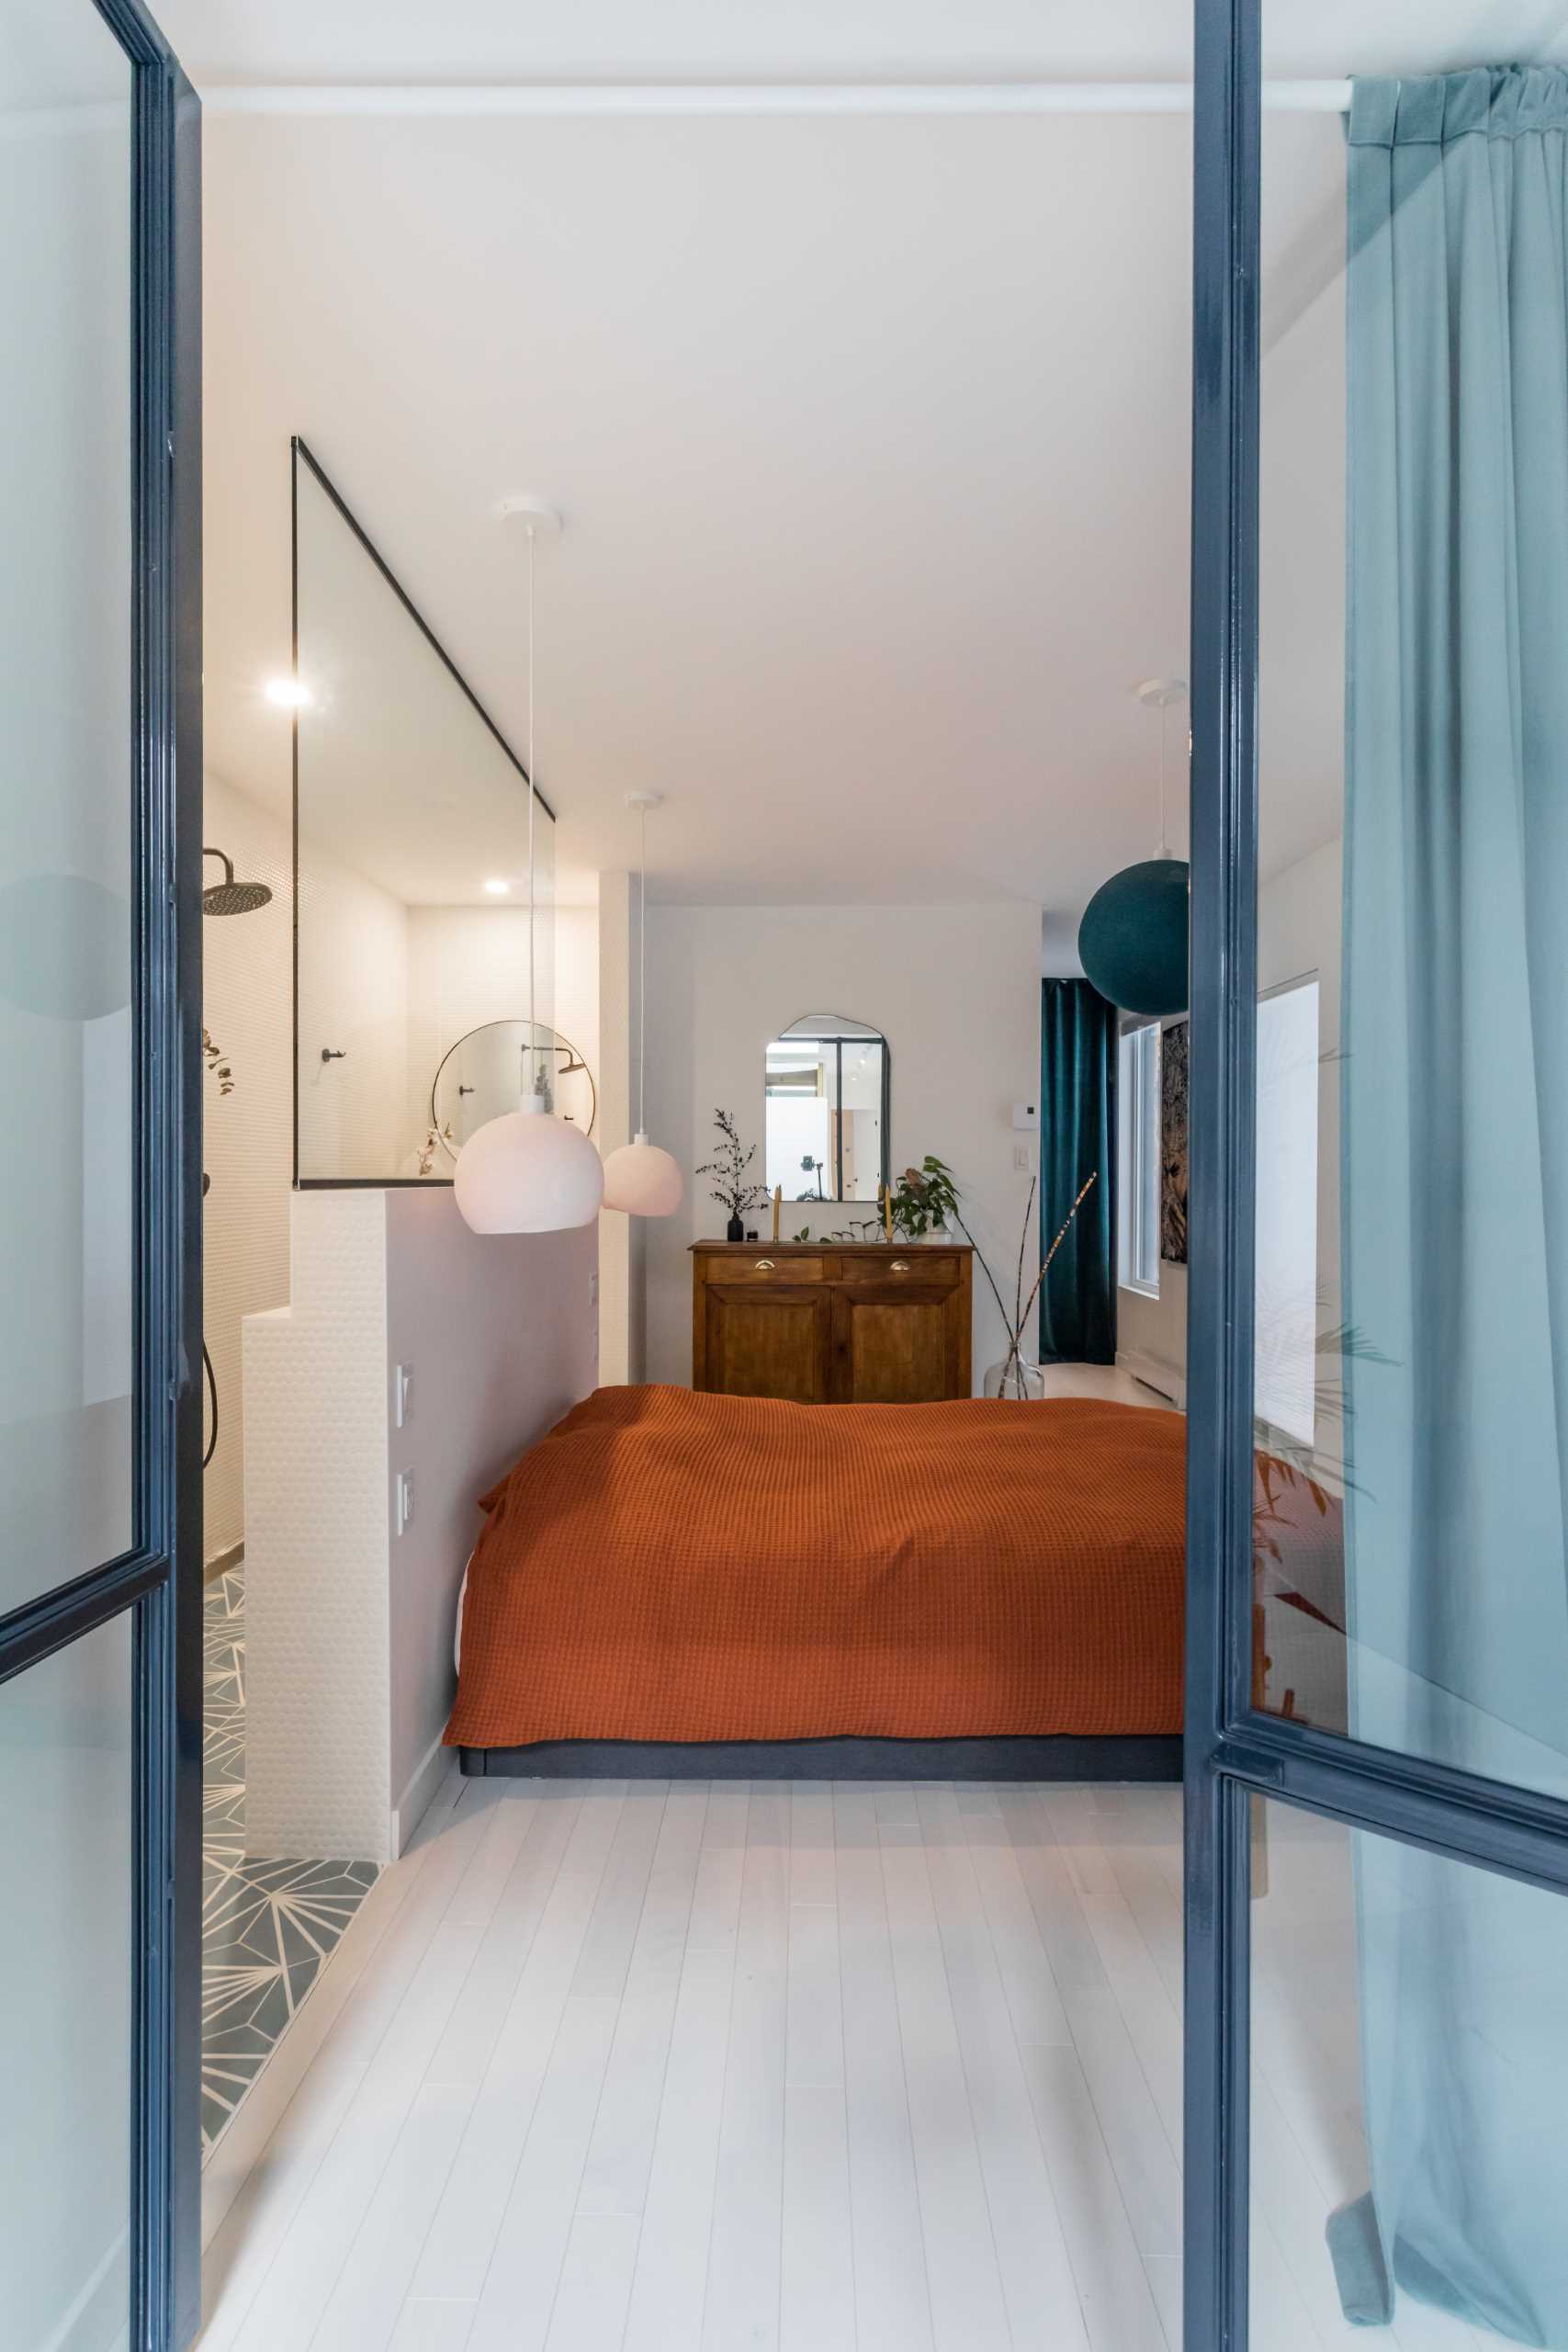 Metal-framed glass doors open to reveal the primary bedroom and bathroom. A pony wall separates the sleeping area from the bathroom, where the shower separates the two vanities.